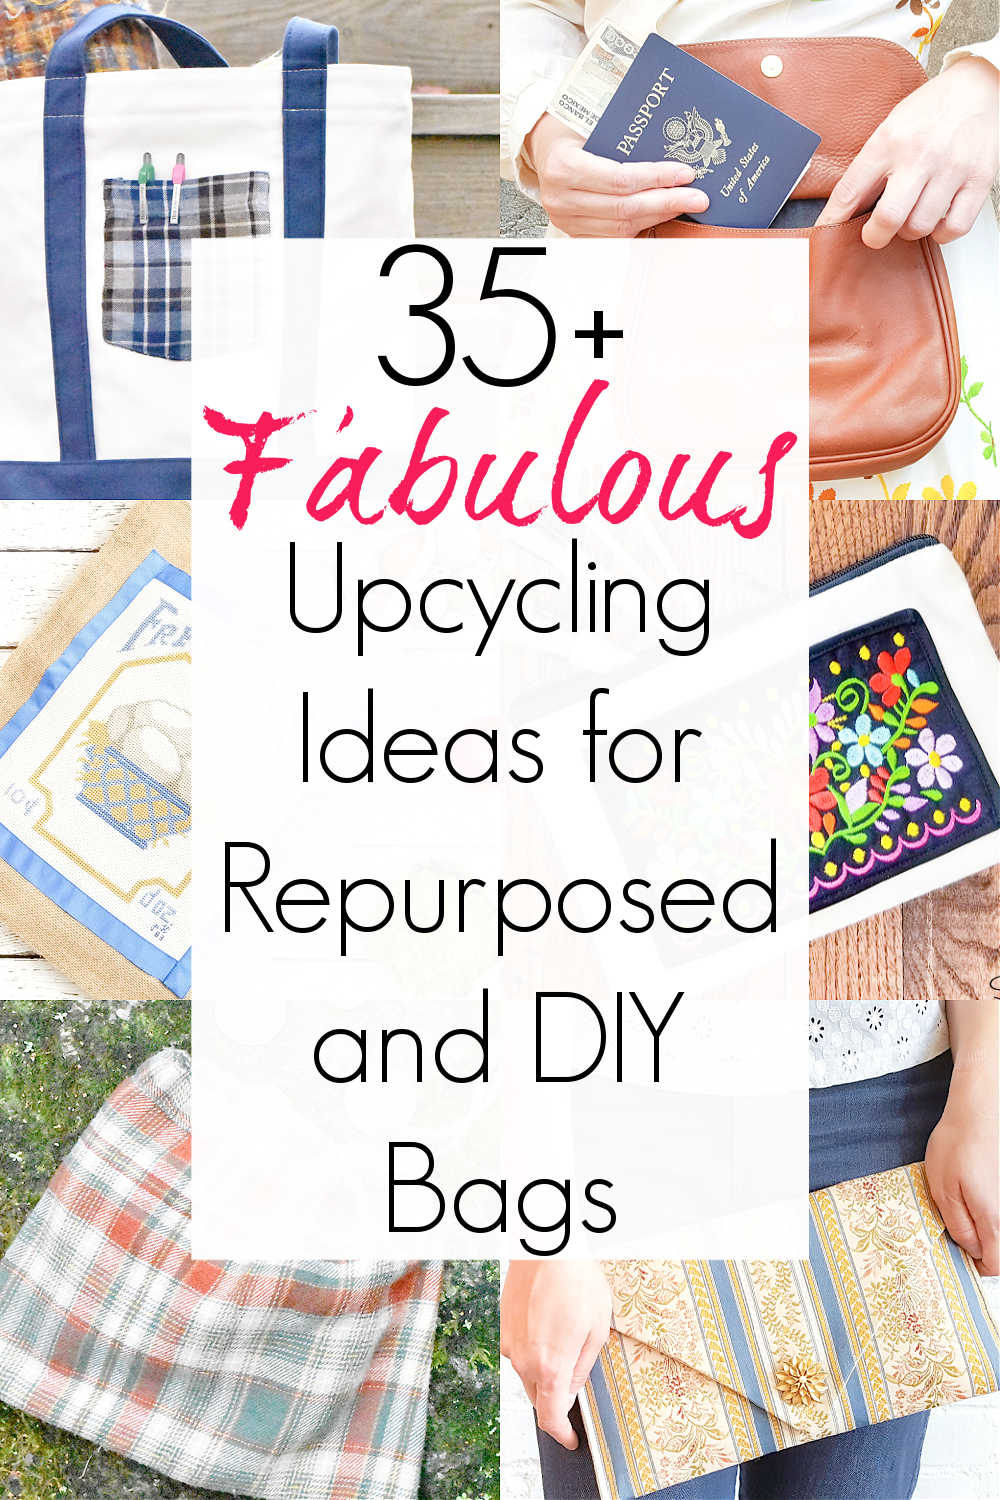 35+ Upcycling Ideas for DIY Bags for One-of-a-Kind Accessories